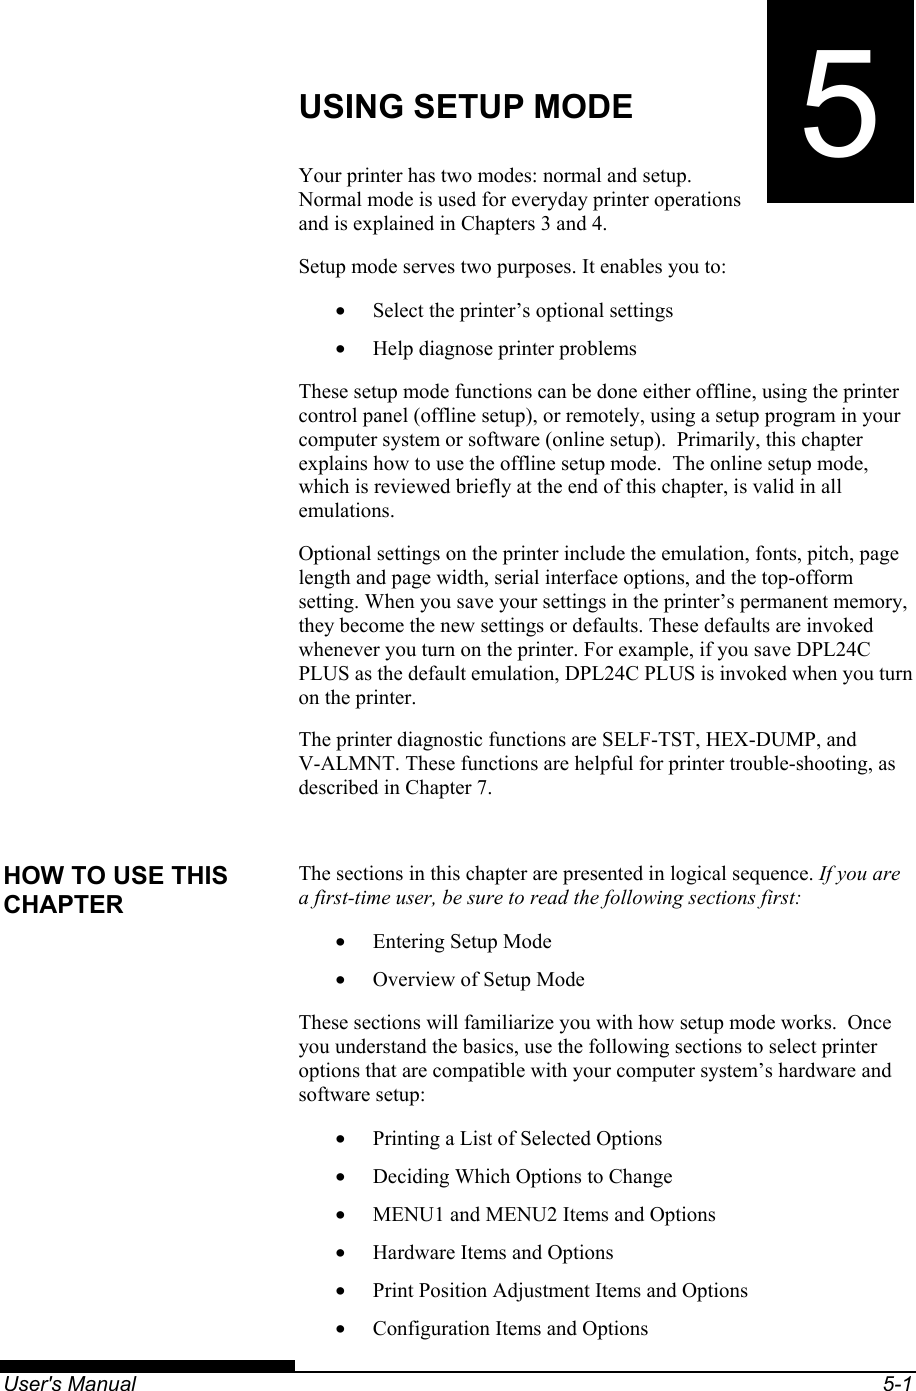   User&apos;s Manual  5-1 5CHAPTER 5  USING SETUP MODE USING SETUP MODE Your printer has two modes: normal and setup. Normal mode is used for everyday printer operations and is explained in Chapters 3 and 4. Setup mode serves two purposes. It enables you to: •  Select the printer’s optional settings •  Help diagnose printer problems These setup mode functions can be done either offline, using the printer control panel (offline setup), or remotely, using a setup program in your computer system or software (online setup).  Primarily, this chapter explains how to use the offline setup mode.  The online setup mode, which is reviewed briefly at the end of this chapter, is valid in all emulations. Optional settings on the printer include the emulation, fonts, pitch, page length and page width, serial interface options, and the top-ofform setting. When you save your settings in the printer’s permanent memory, they become the new settings or defaults. These defaults are invoked whenever you turn on the printer. For example, if you save DPL24C PLUS as the default emulation, DPL24C PLUS is invoked when you turn on the printer. The printer diagnostic functions are SELF-TST, HEX-DUMP, and V-ALMNT. These functions are helpful for printer trouble-shooting, as described in Chapter 7.  The sections in this chapter are presented in logical sequence. If you are a first-time user, be sure to read the following sections first: •  Entering Setup Mode •  Overview of Setup Mode These sections will familiarize you with how setup mode works.  Once you understand the basics, use the following sections to select printer options that are compatible with your computer system’s hardware and software setup: •  Printing a List of Selected Options •  Deciding Which Options to Change •  MENU1 and MENU2 Items and Options •  Hardware Items and Options •  Print Position Adjustment Items and Options •  Configuration Items and Options HOW TO USE THIS CHAPTER 